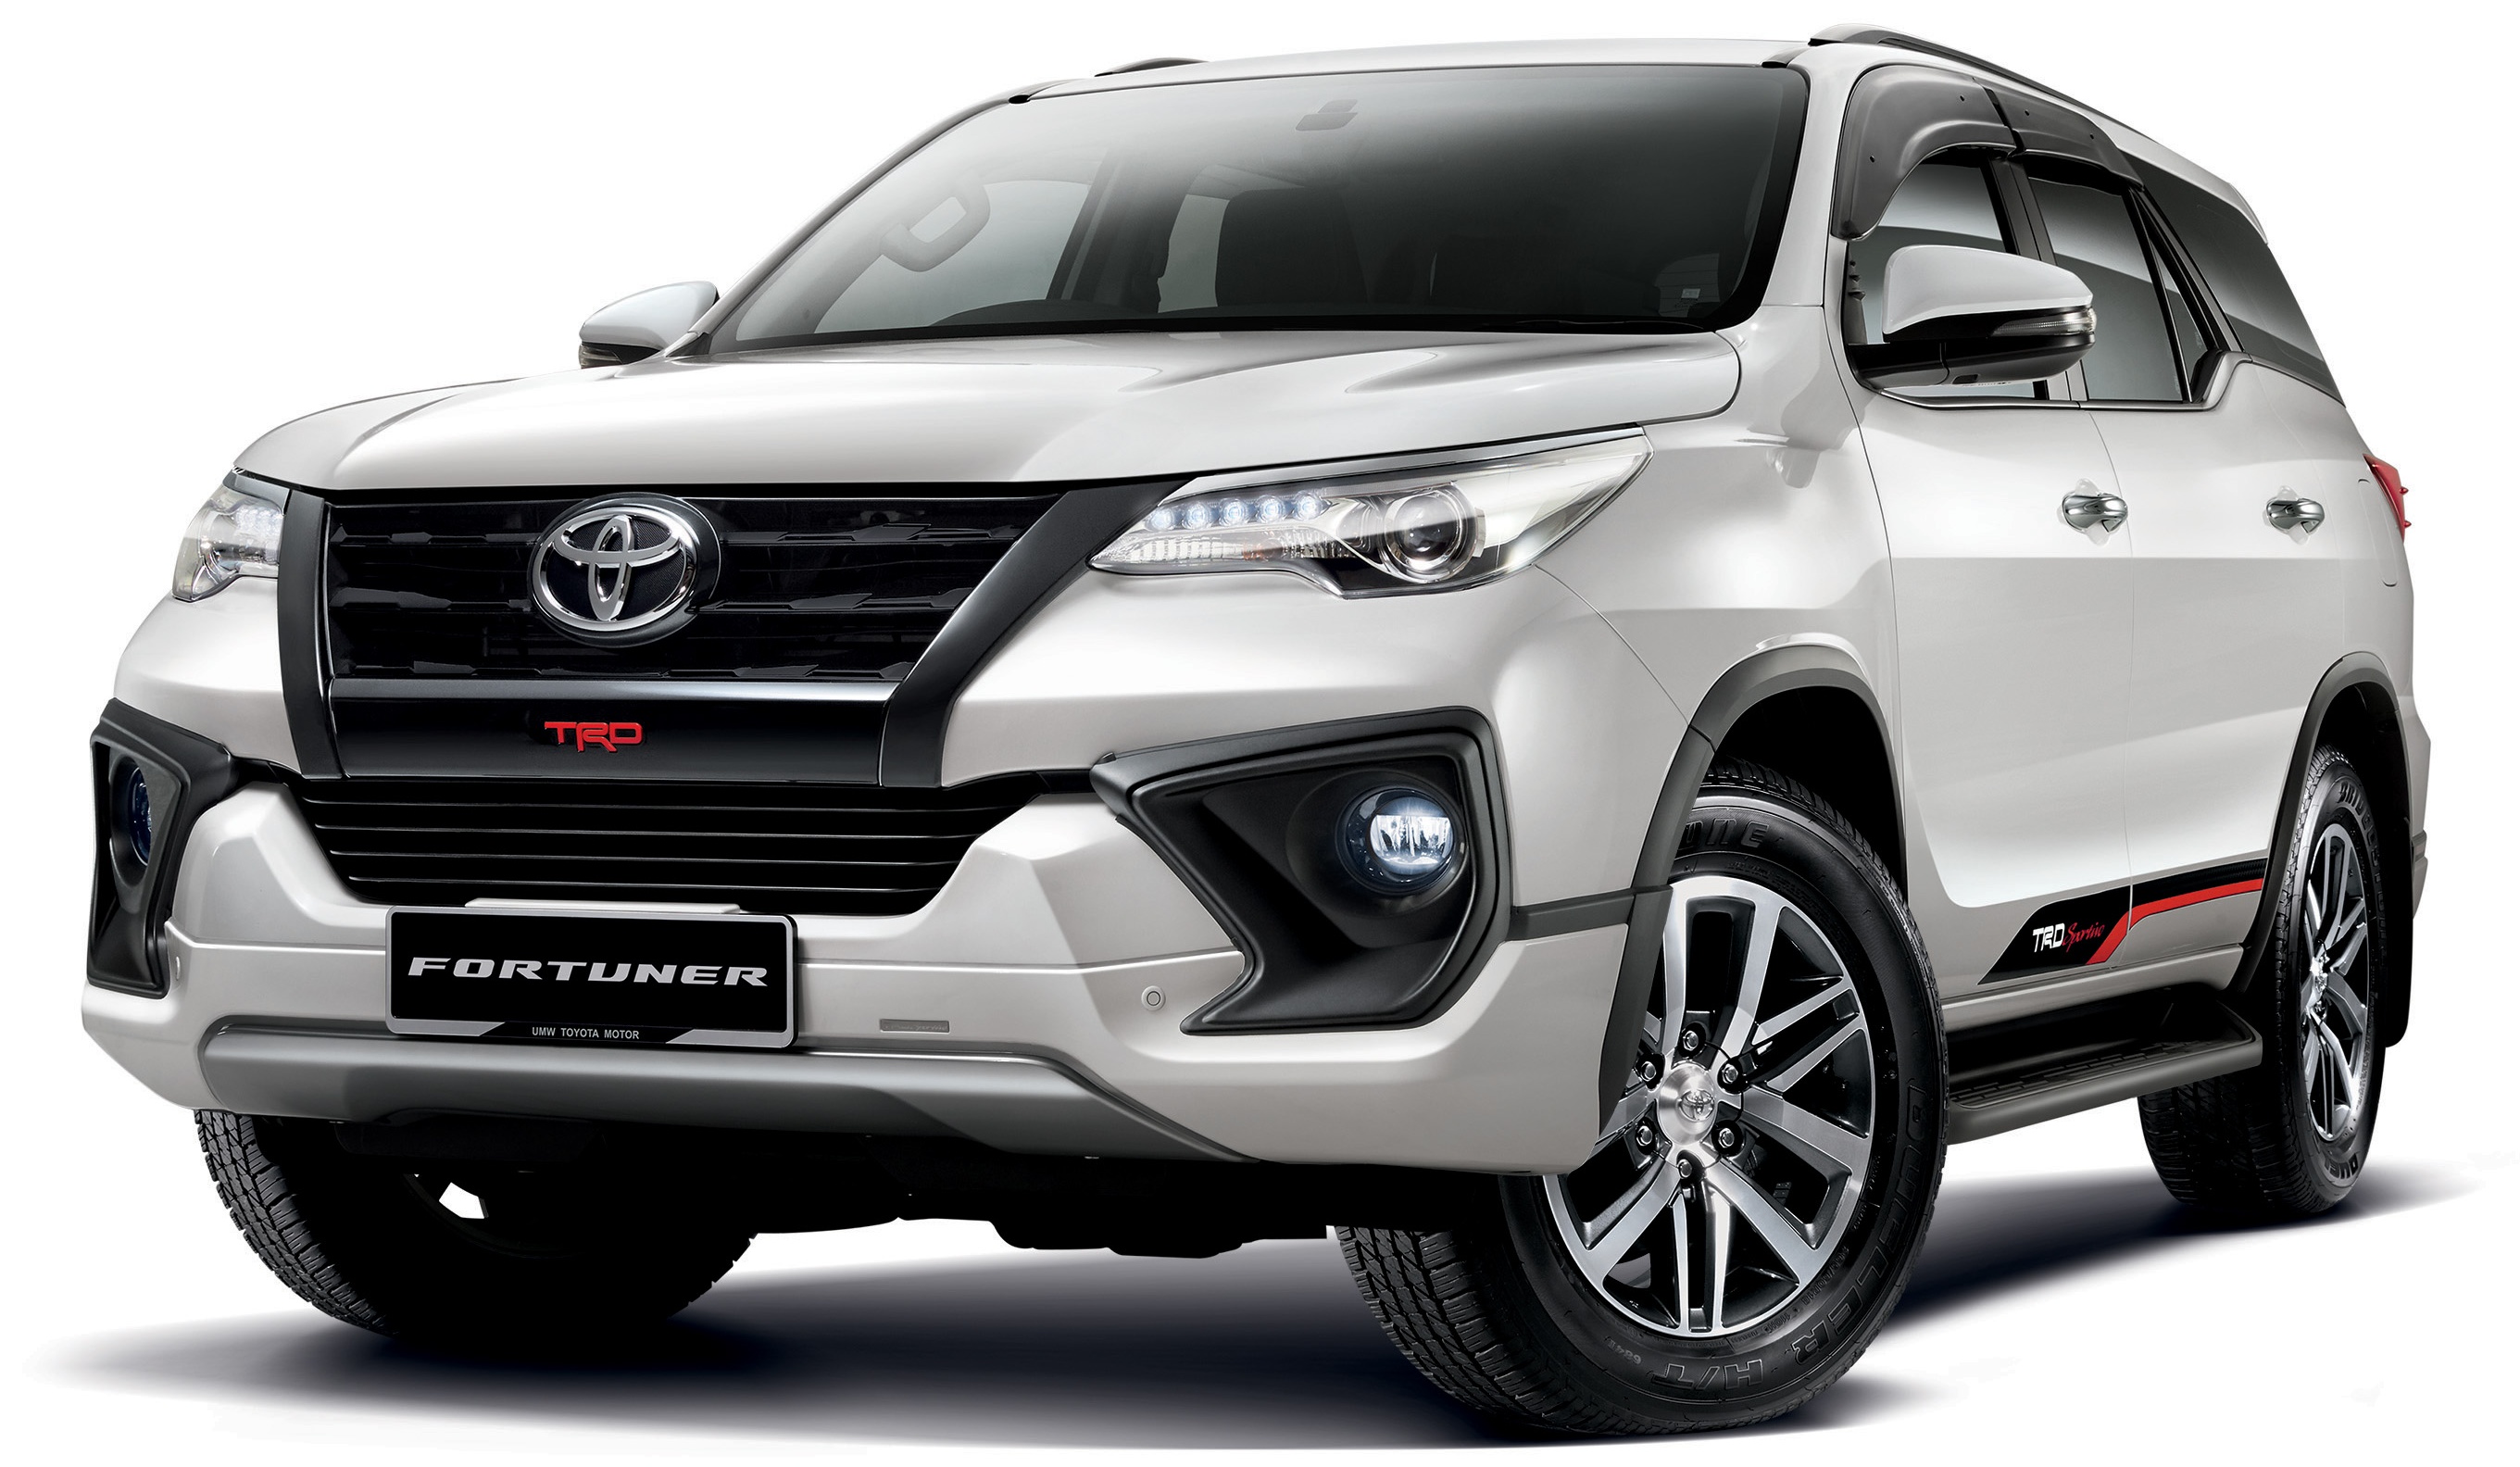 Toyota Fortuner updated, now on sale new 2.4 VRZ 4x2 and 4x4 from